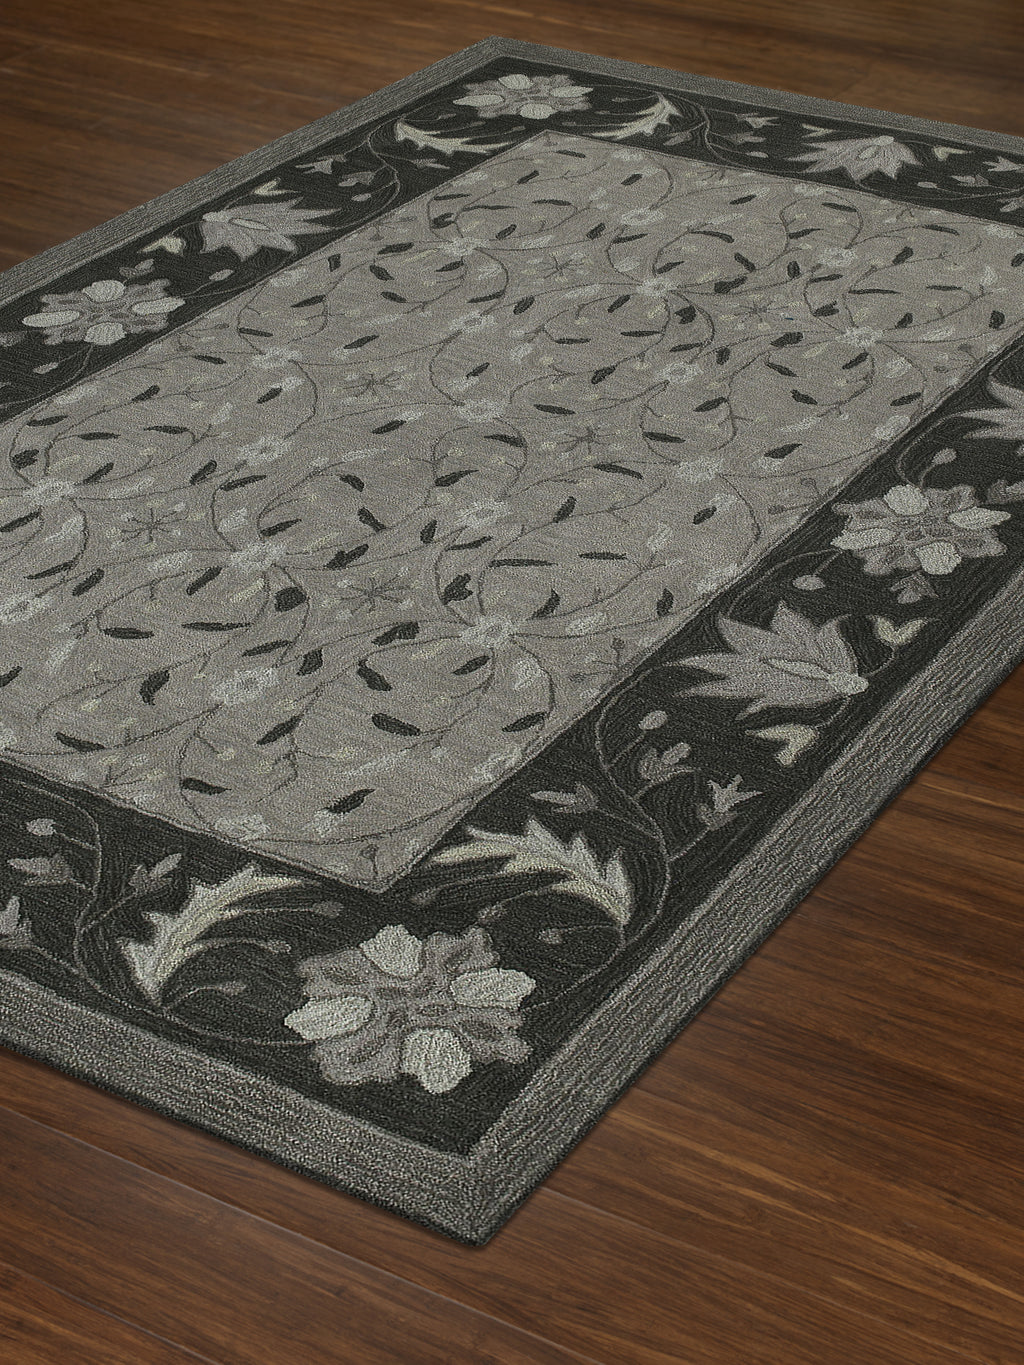 Dalyn Tribeca TB1 Pewter Area Rug Floor Image Feature